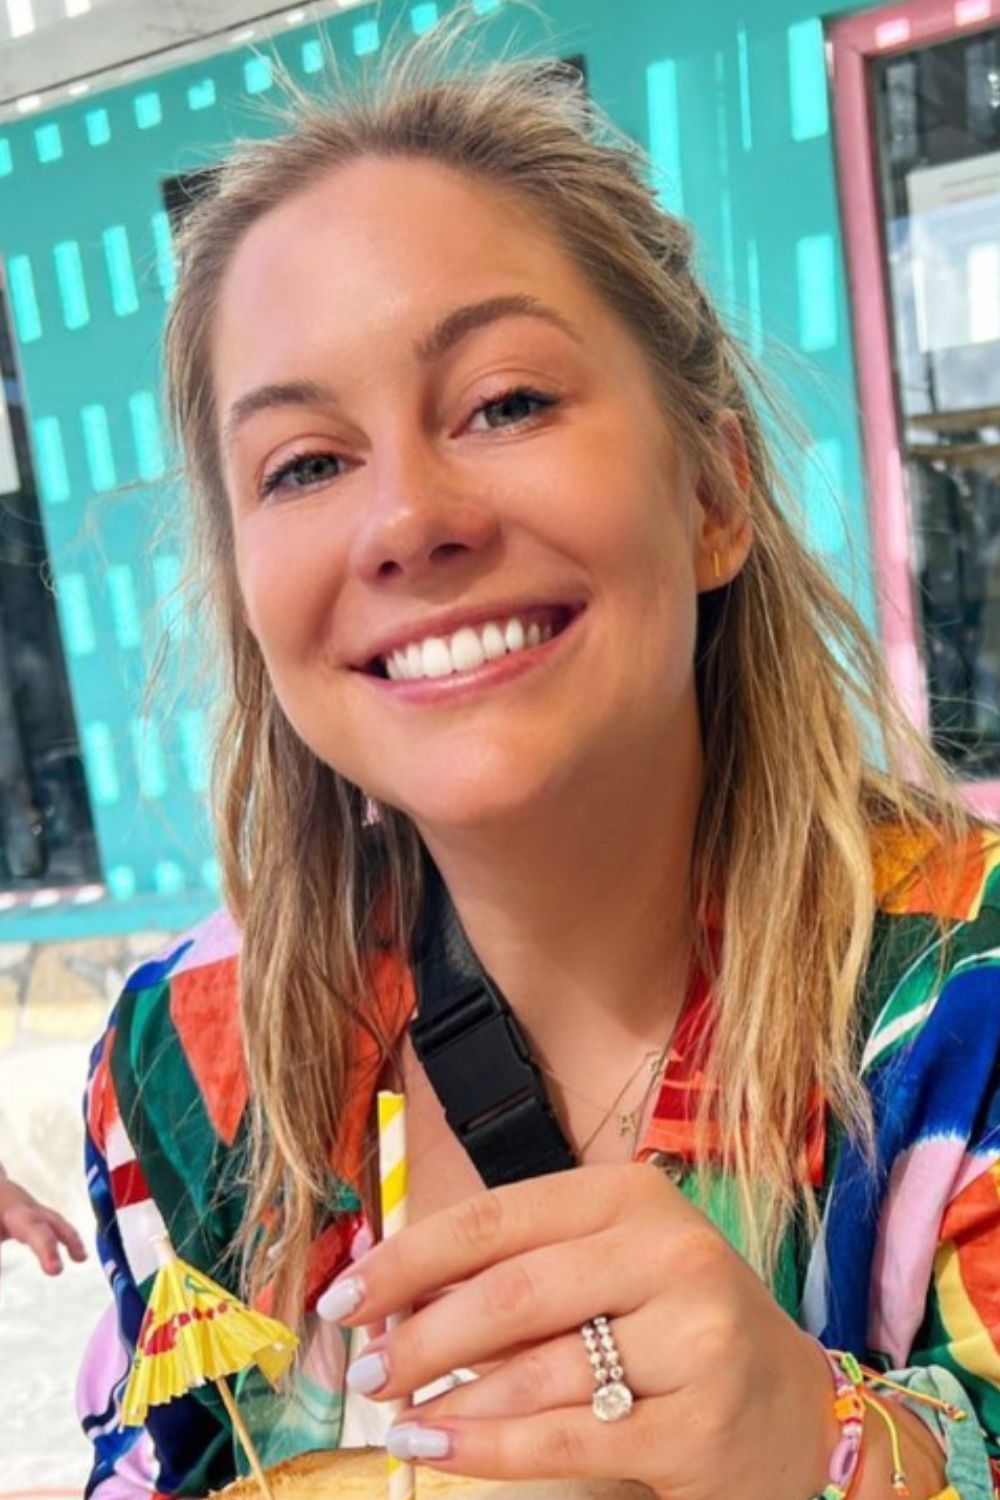 Shawn Johnson smiling brightly in a beautiful dress